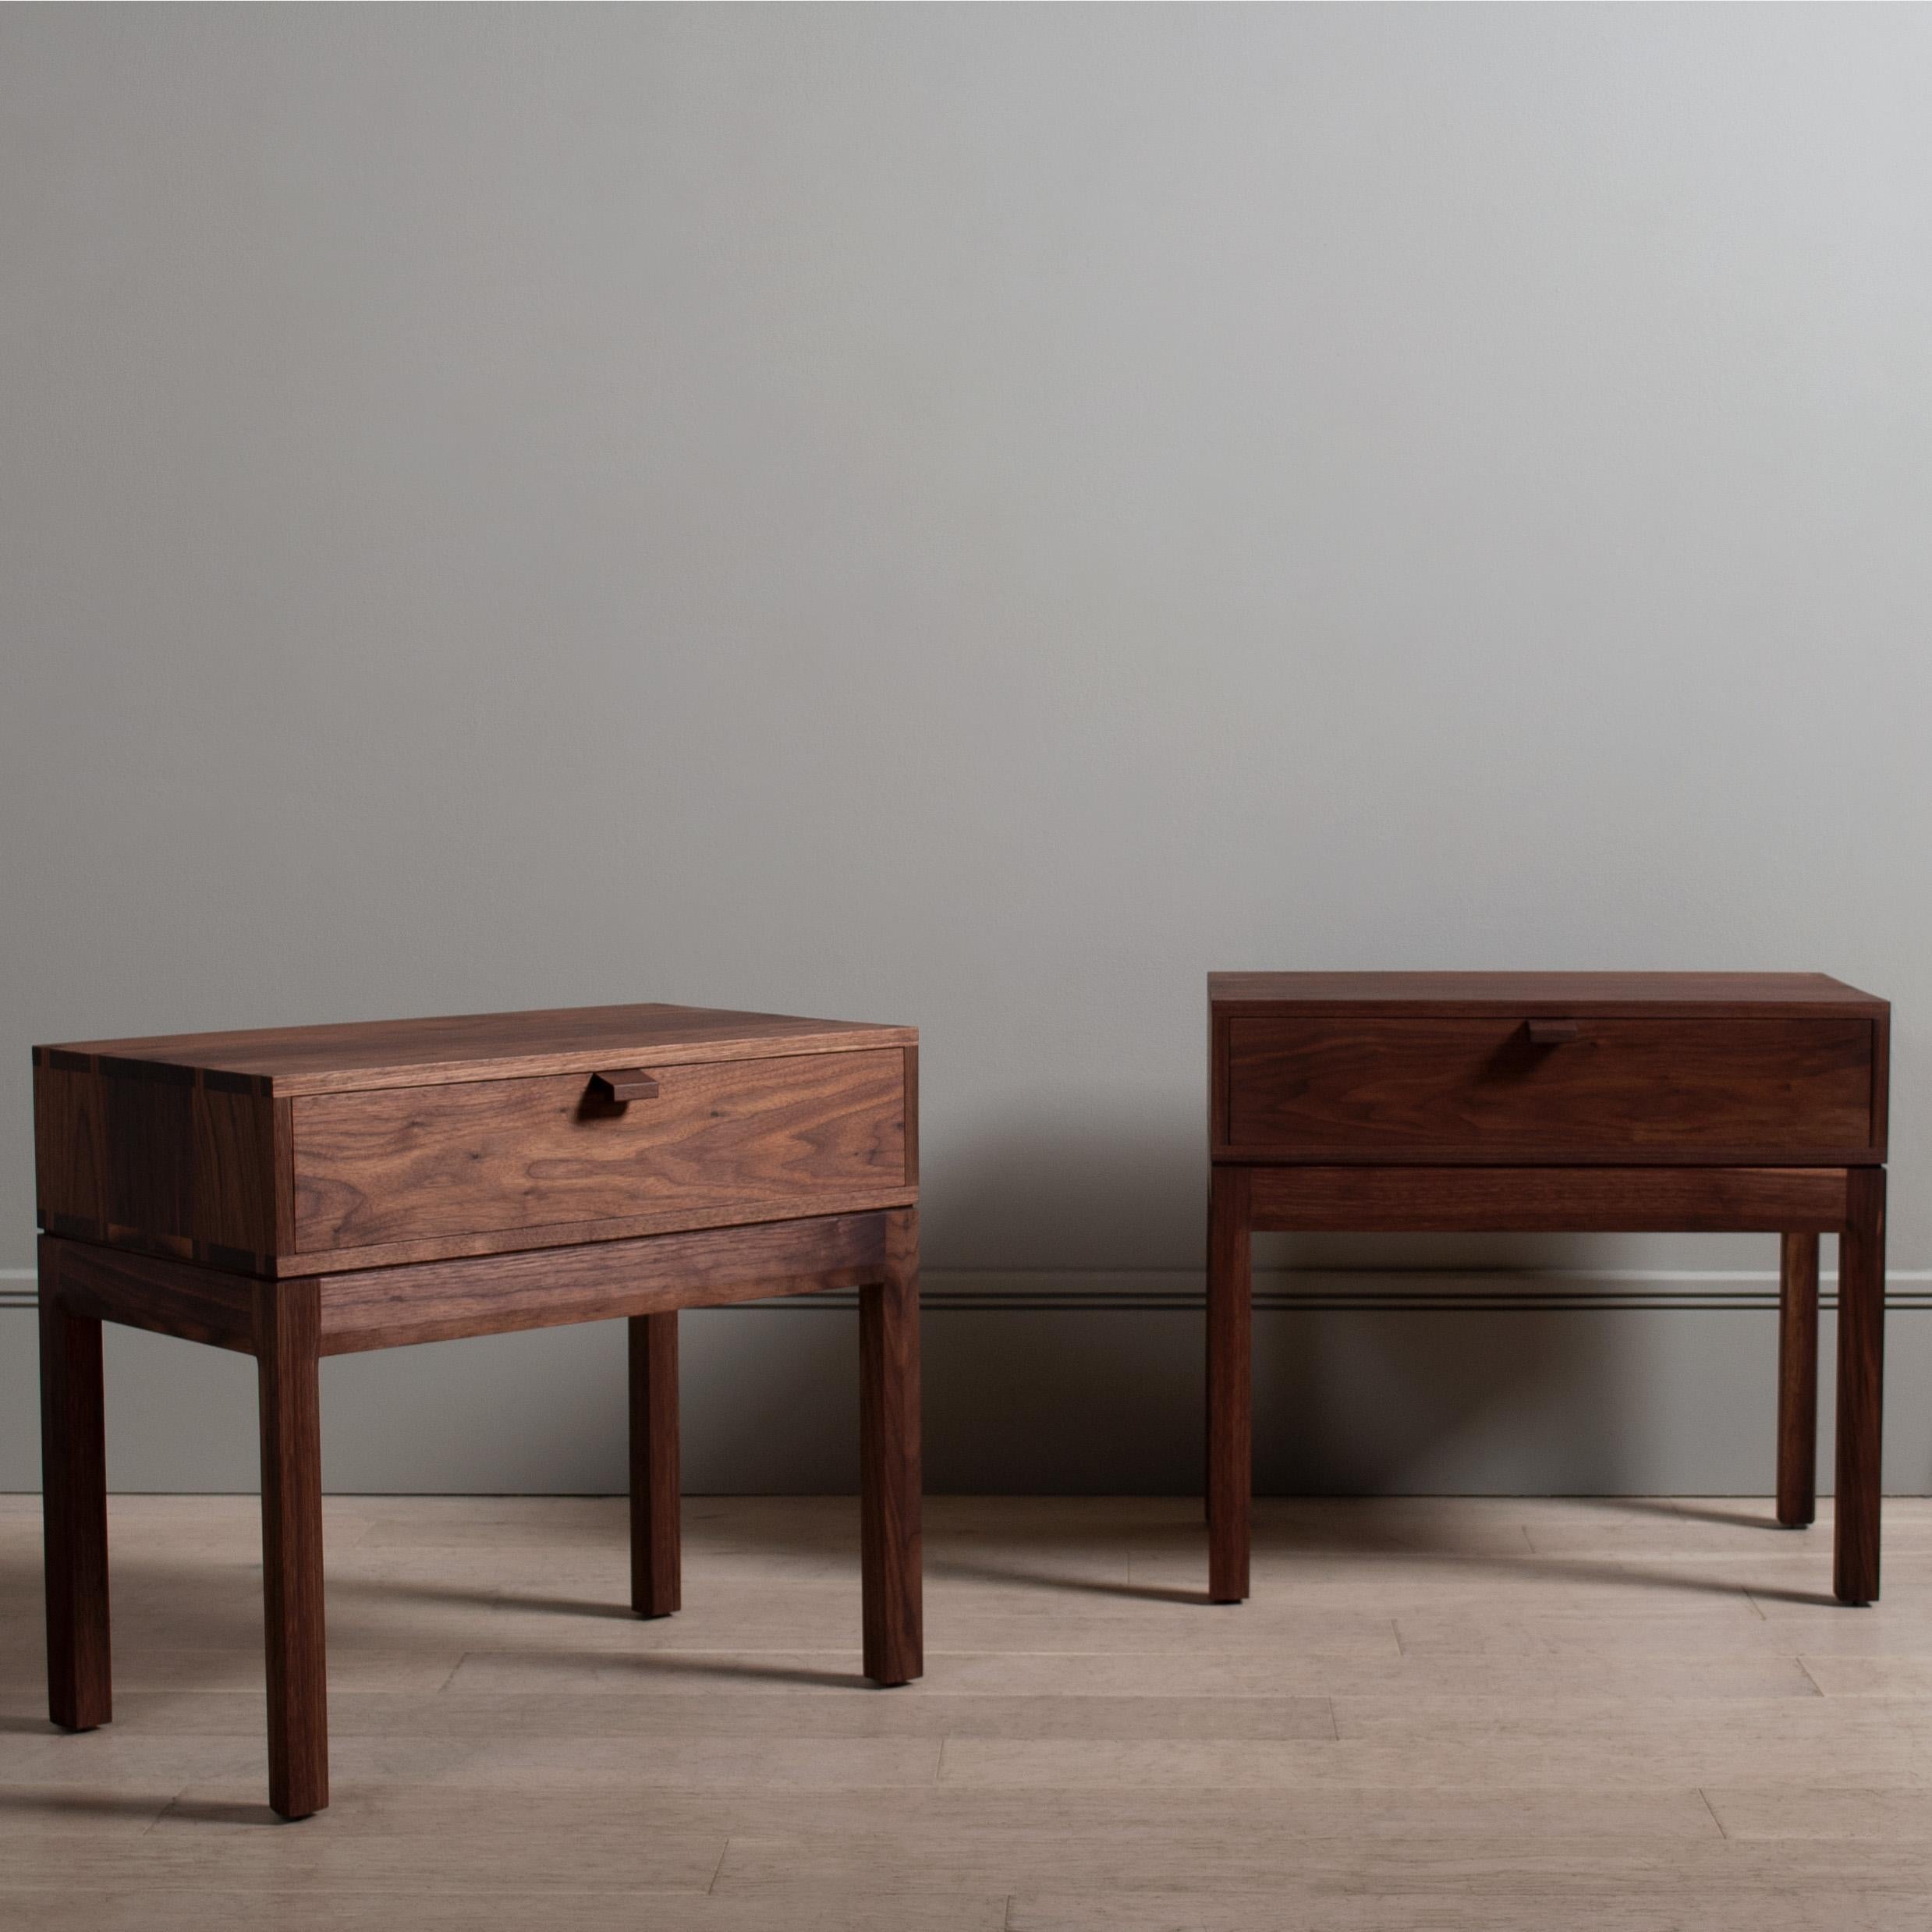 Contemporary Handcrafted Walnut & Oak Nightstands, Bedside Tables For Sale